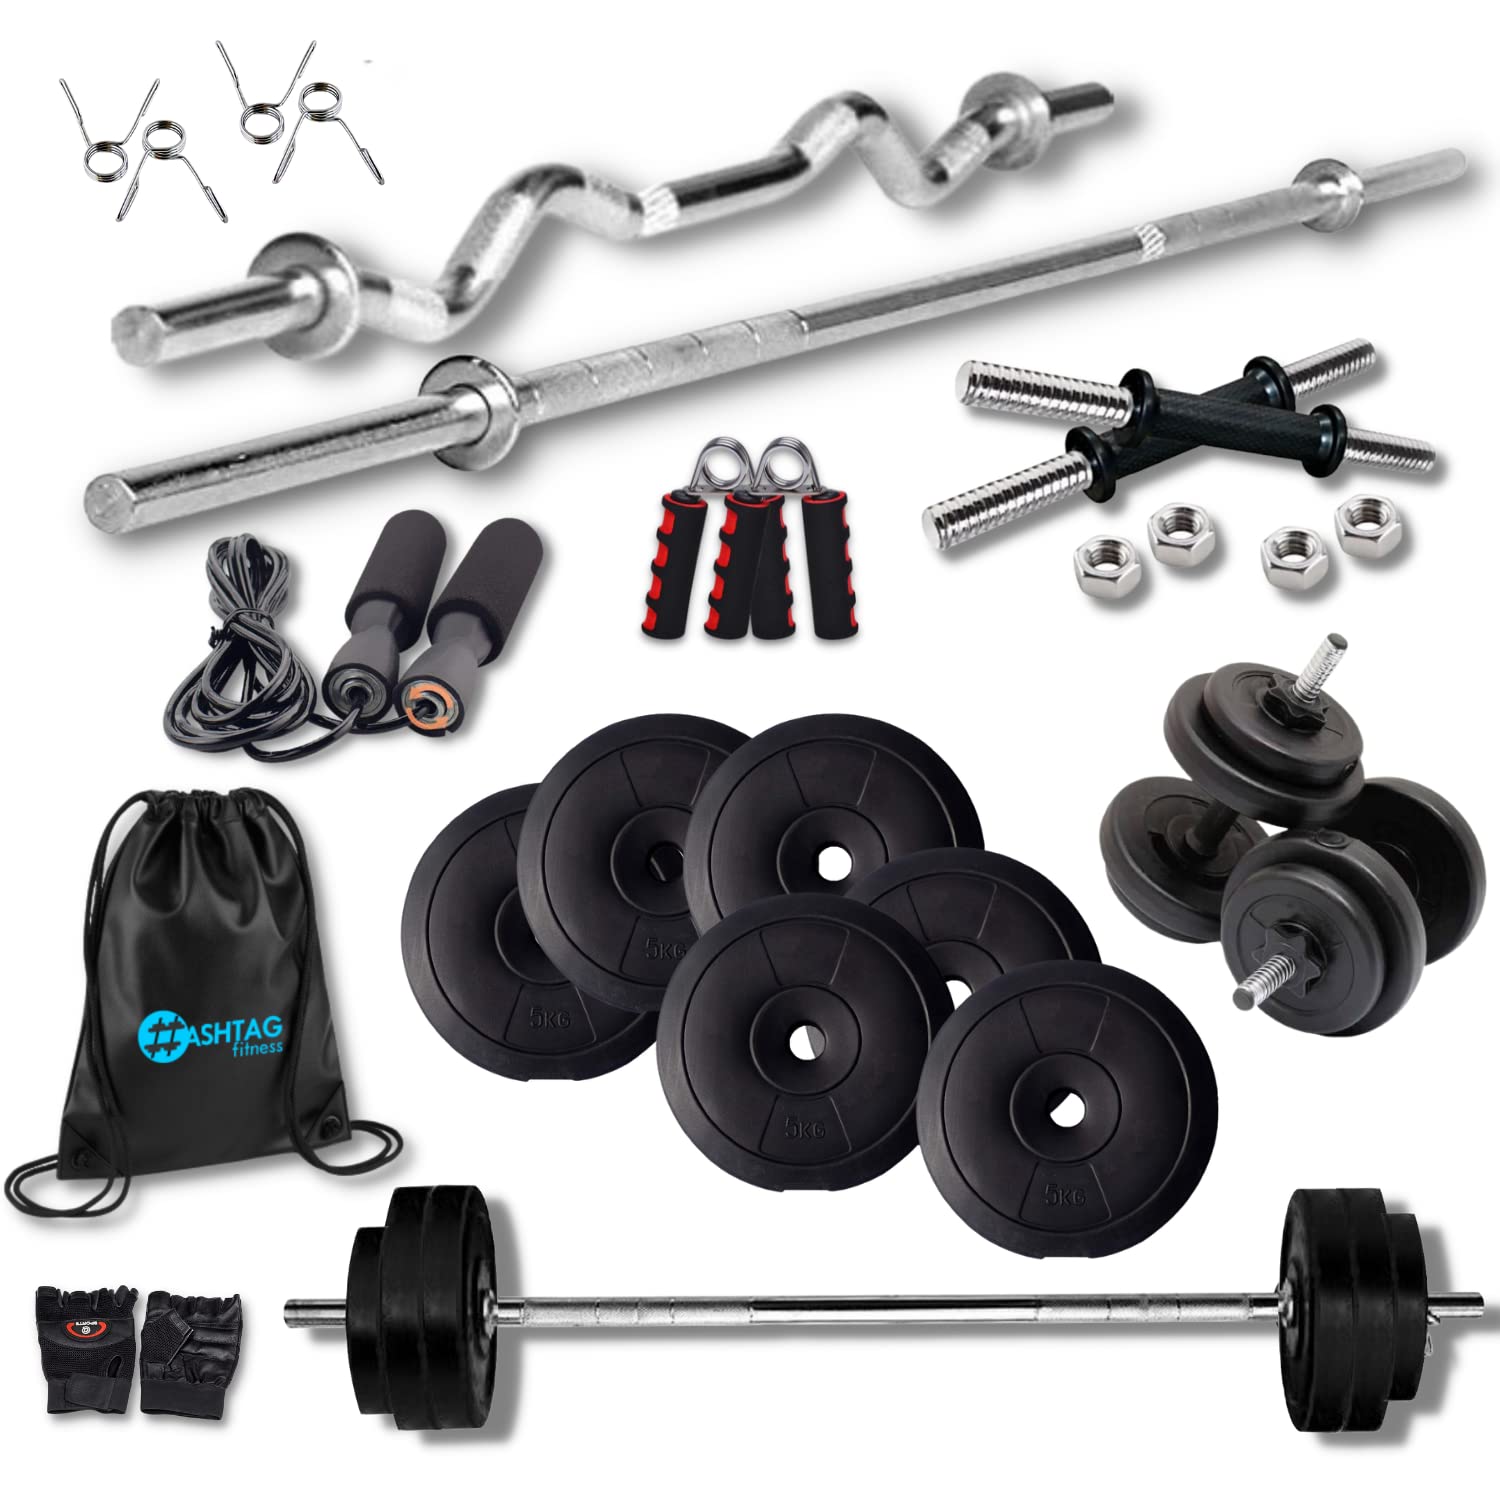 HASHTAG FITNESS 10kg to 60kg Gym Equipment Set for Home Workout Dumbbells  Set for Home Gym for Home with 8in1 Gym Bench for Home Workout - Hashtag  Fitness : Online gym equipments